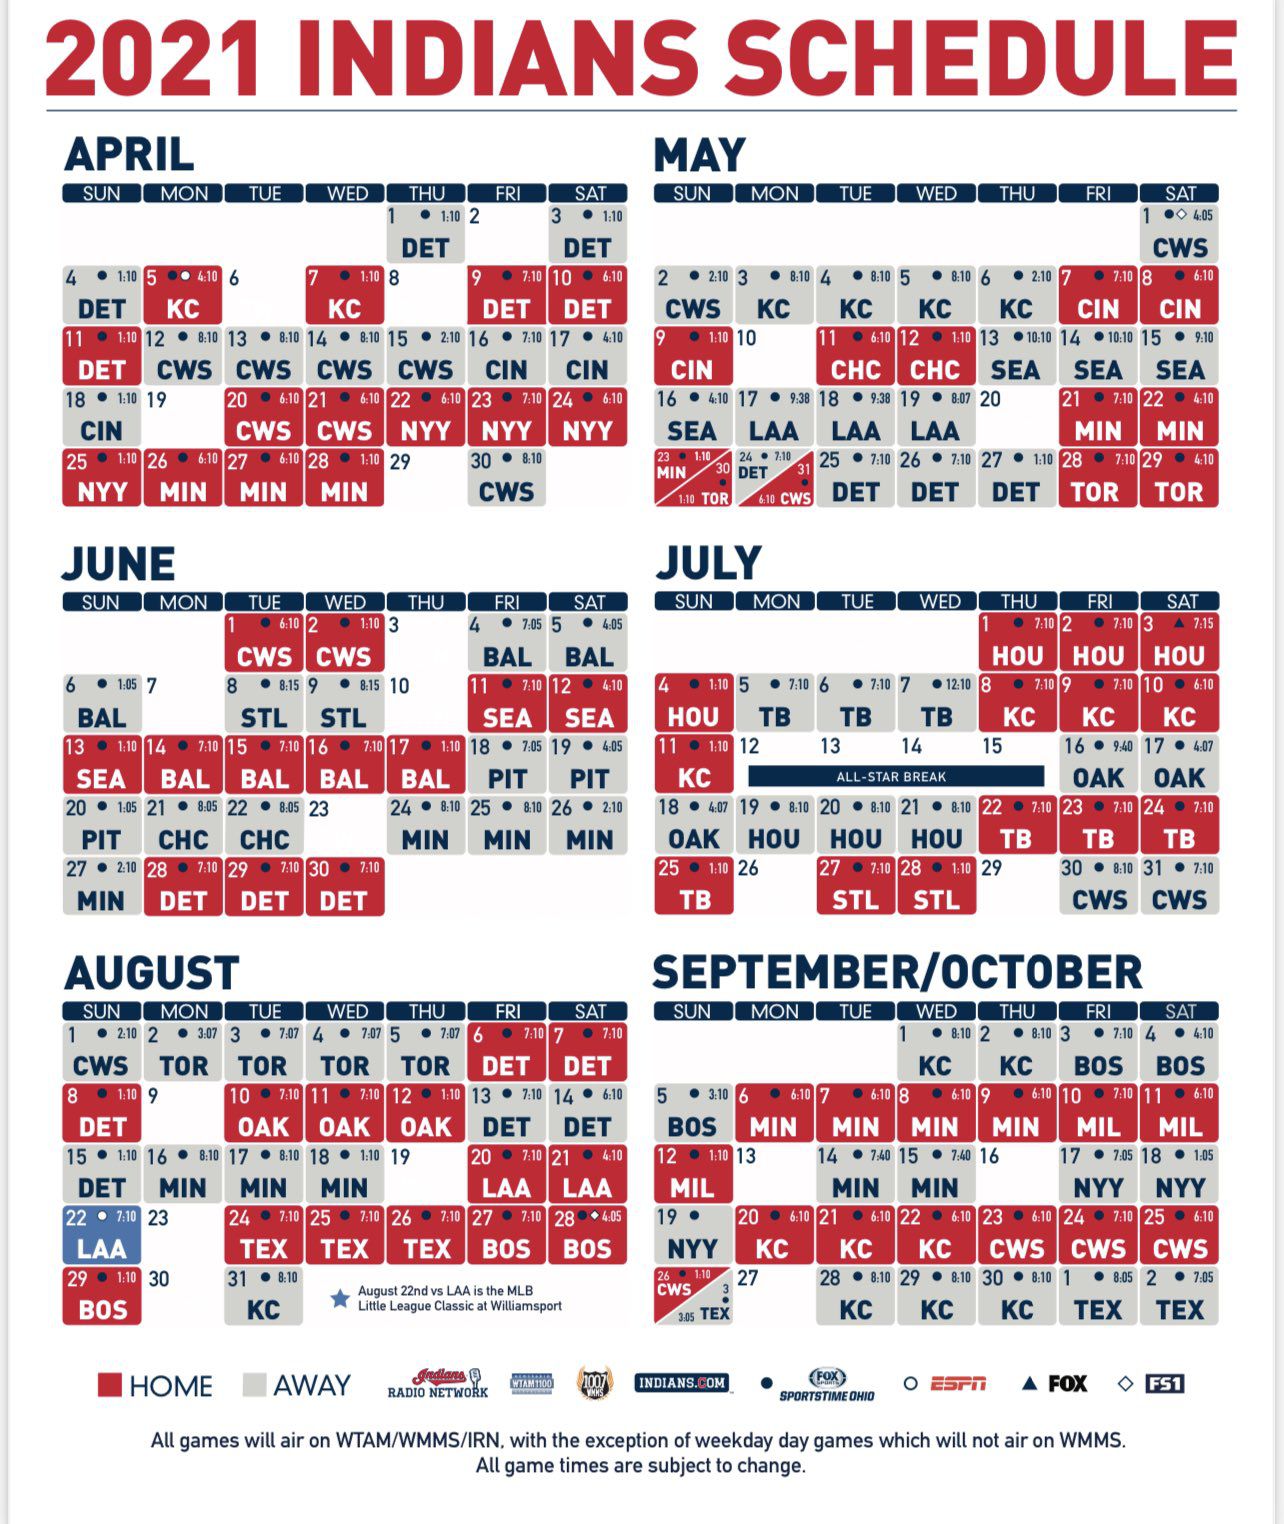 Indians Schedule 2022 Cleveland Indians 2021 Schedule Features April 5 Home Opener, Aug. 22  Matchup Vs. Angels In Williamsport, Pa. - Cleveland.com